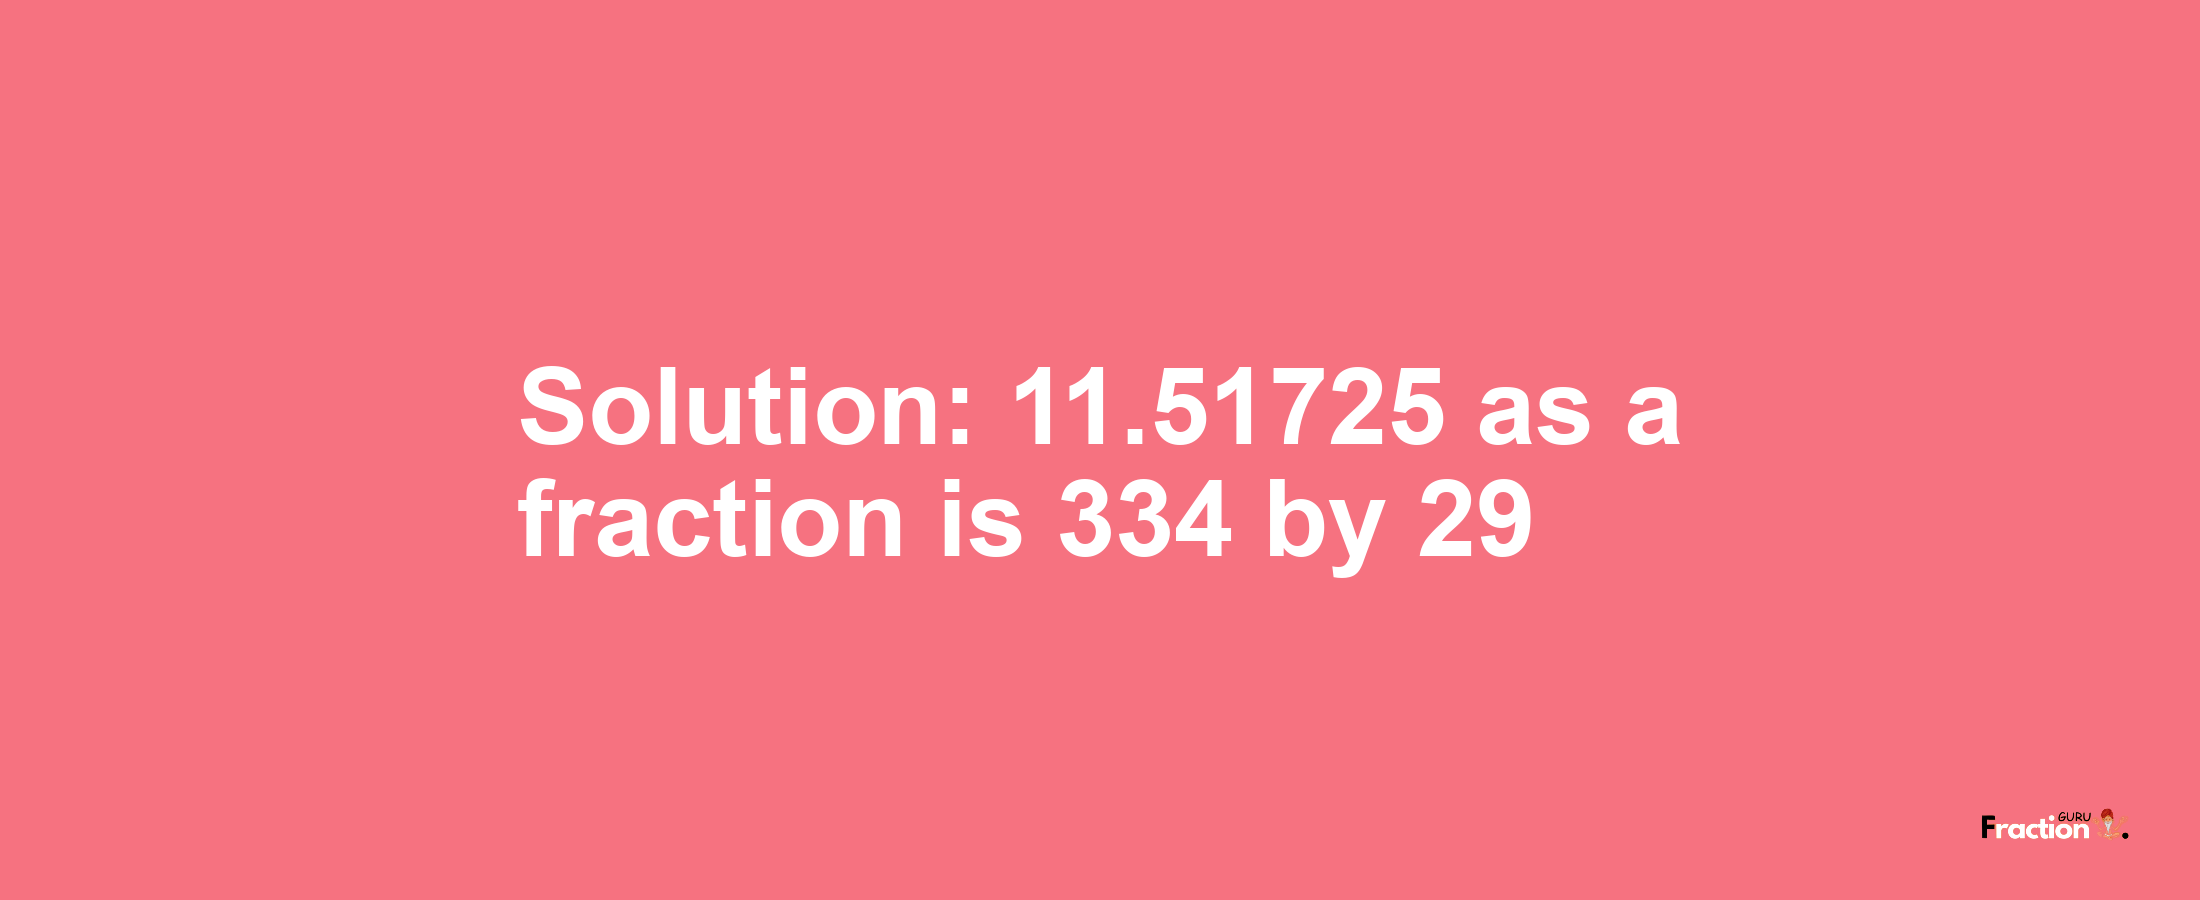 Solution:11.51725 as a fraction is 334/29